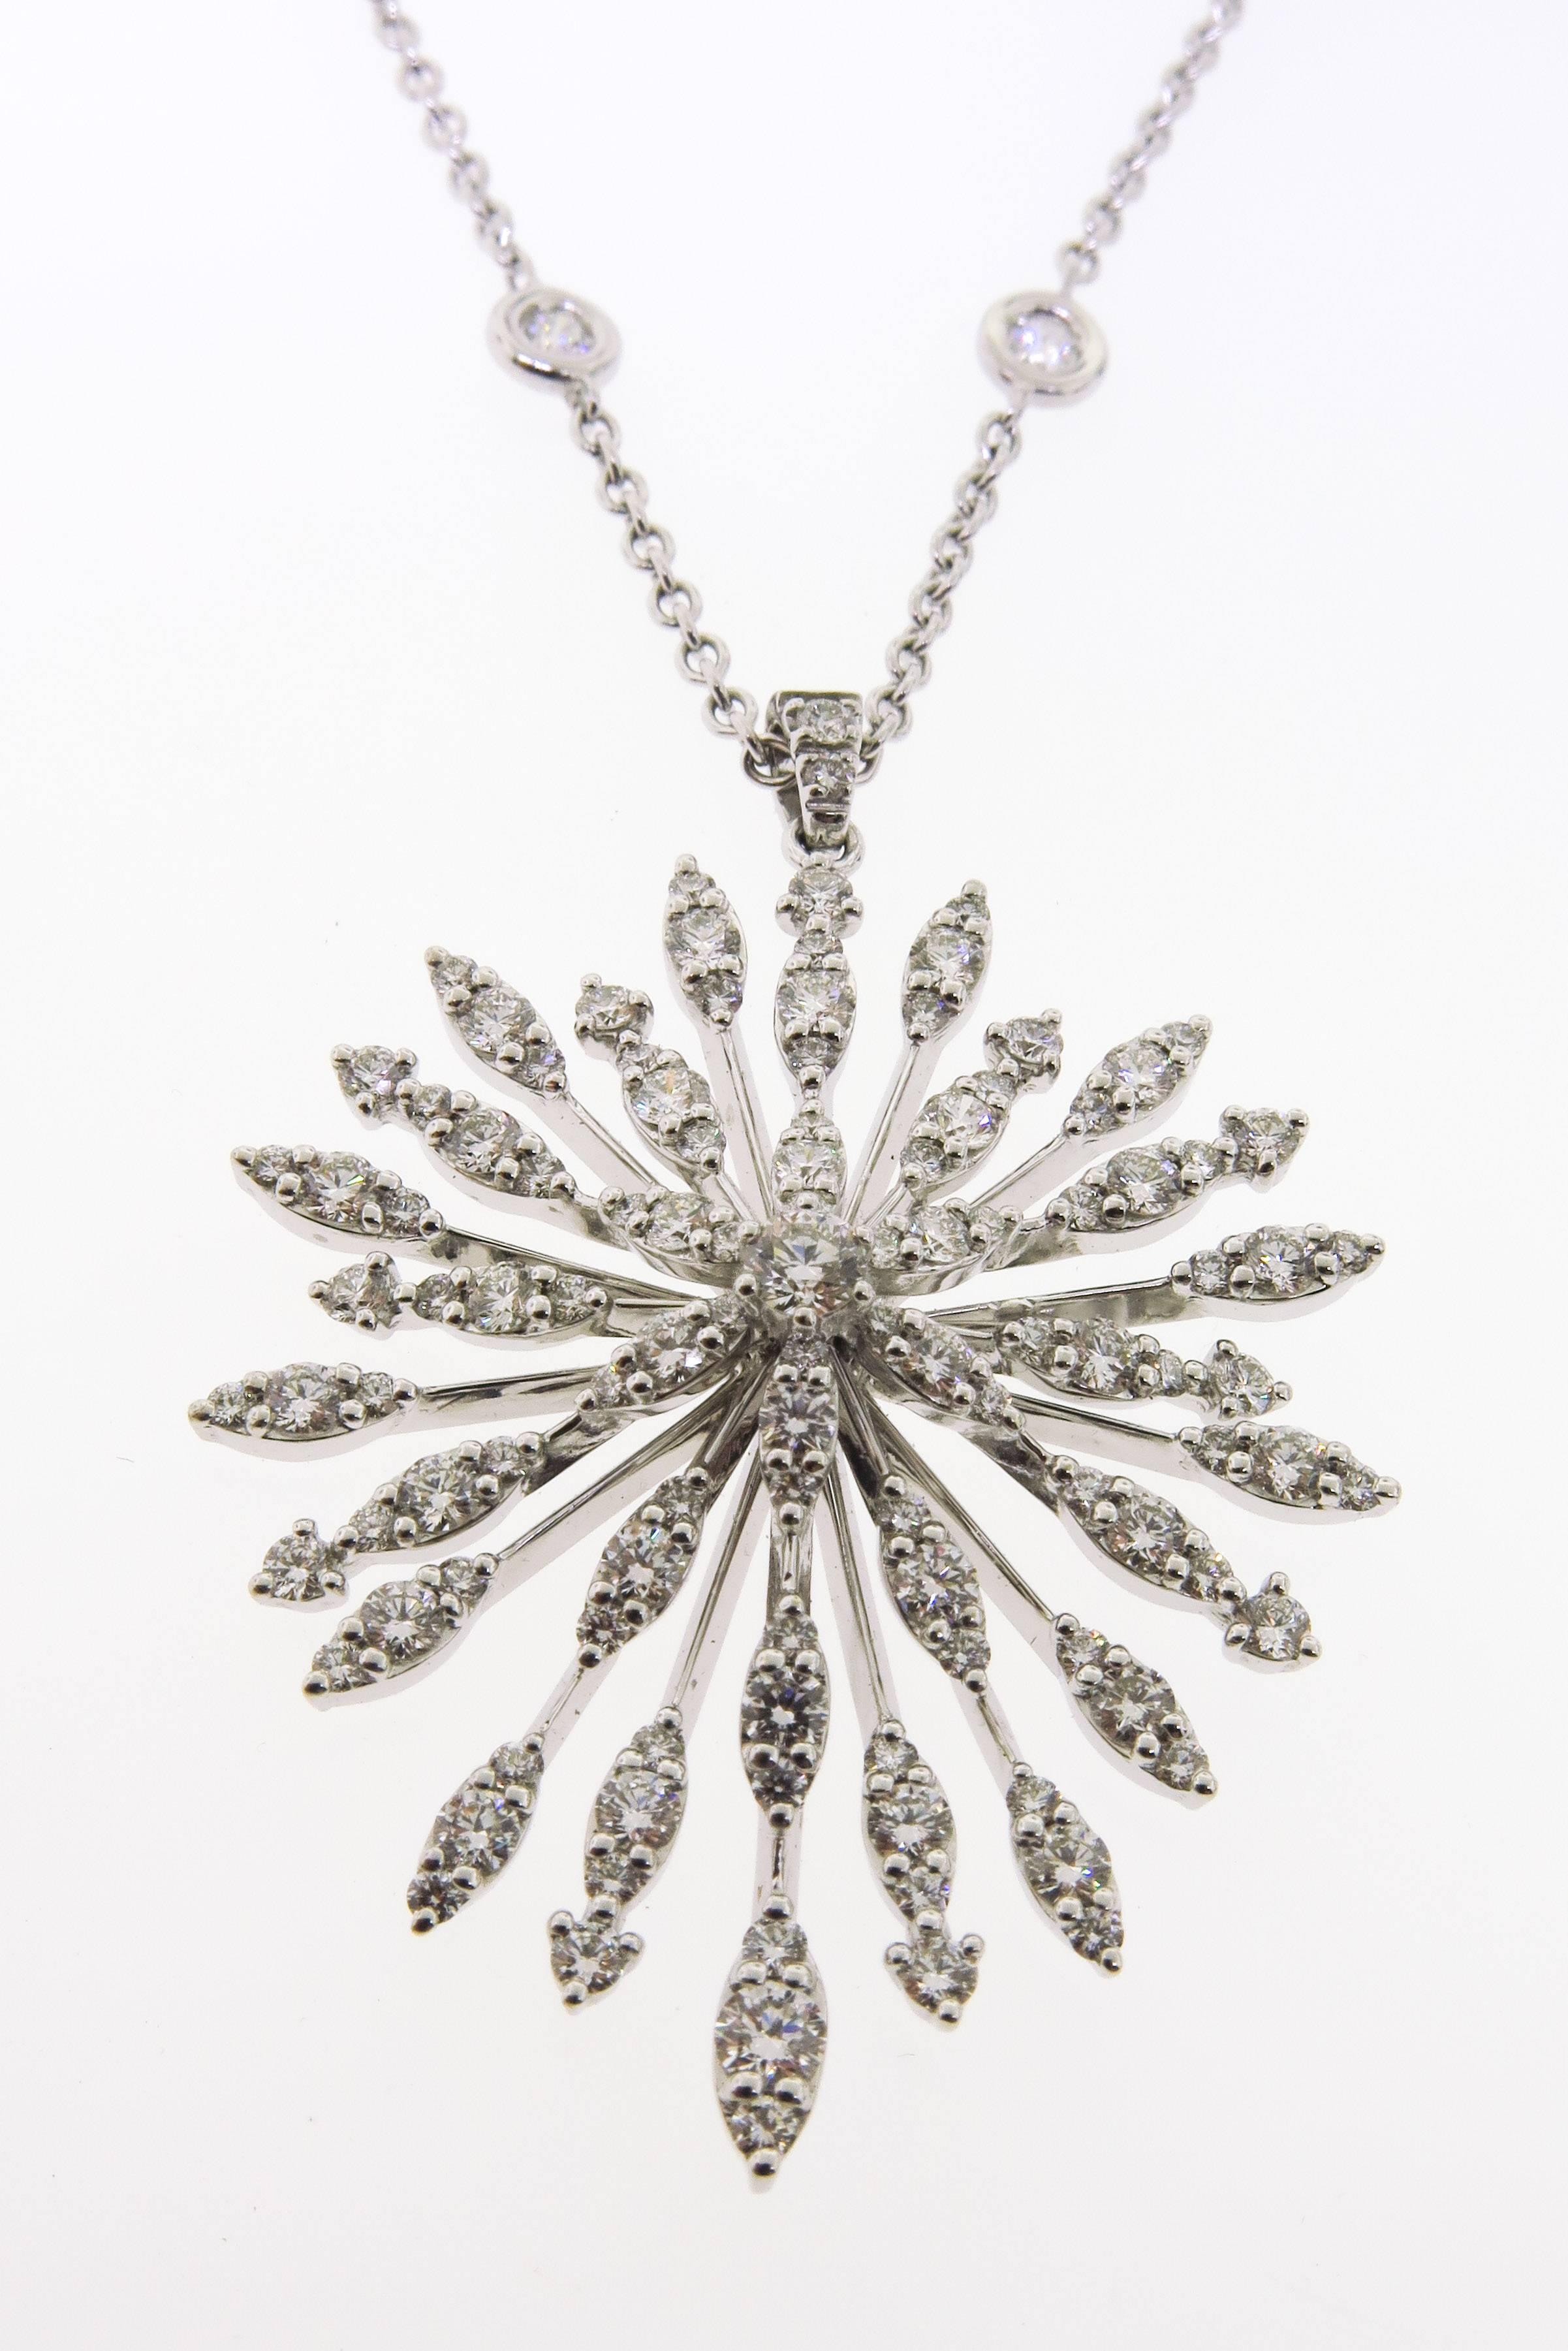 A truly extraordinary piece of jewelry featuring 2.38 total carats of Round Cut diamonds. This necklace is crafted in 18K white gold and measures approximately 17 inches in length. 
Equally chic with a cocktail dress, heels or jeans, they are